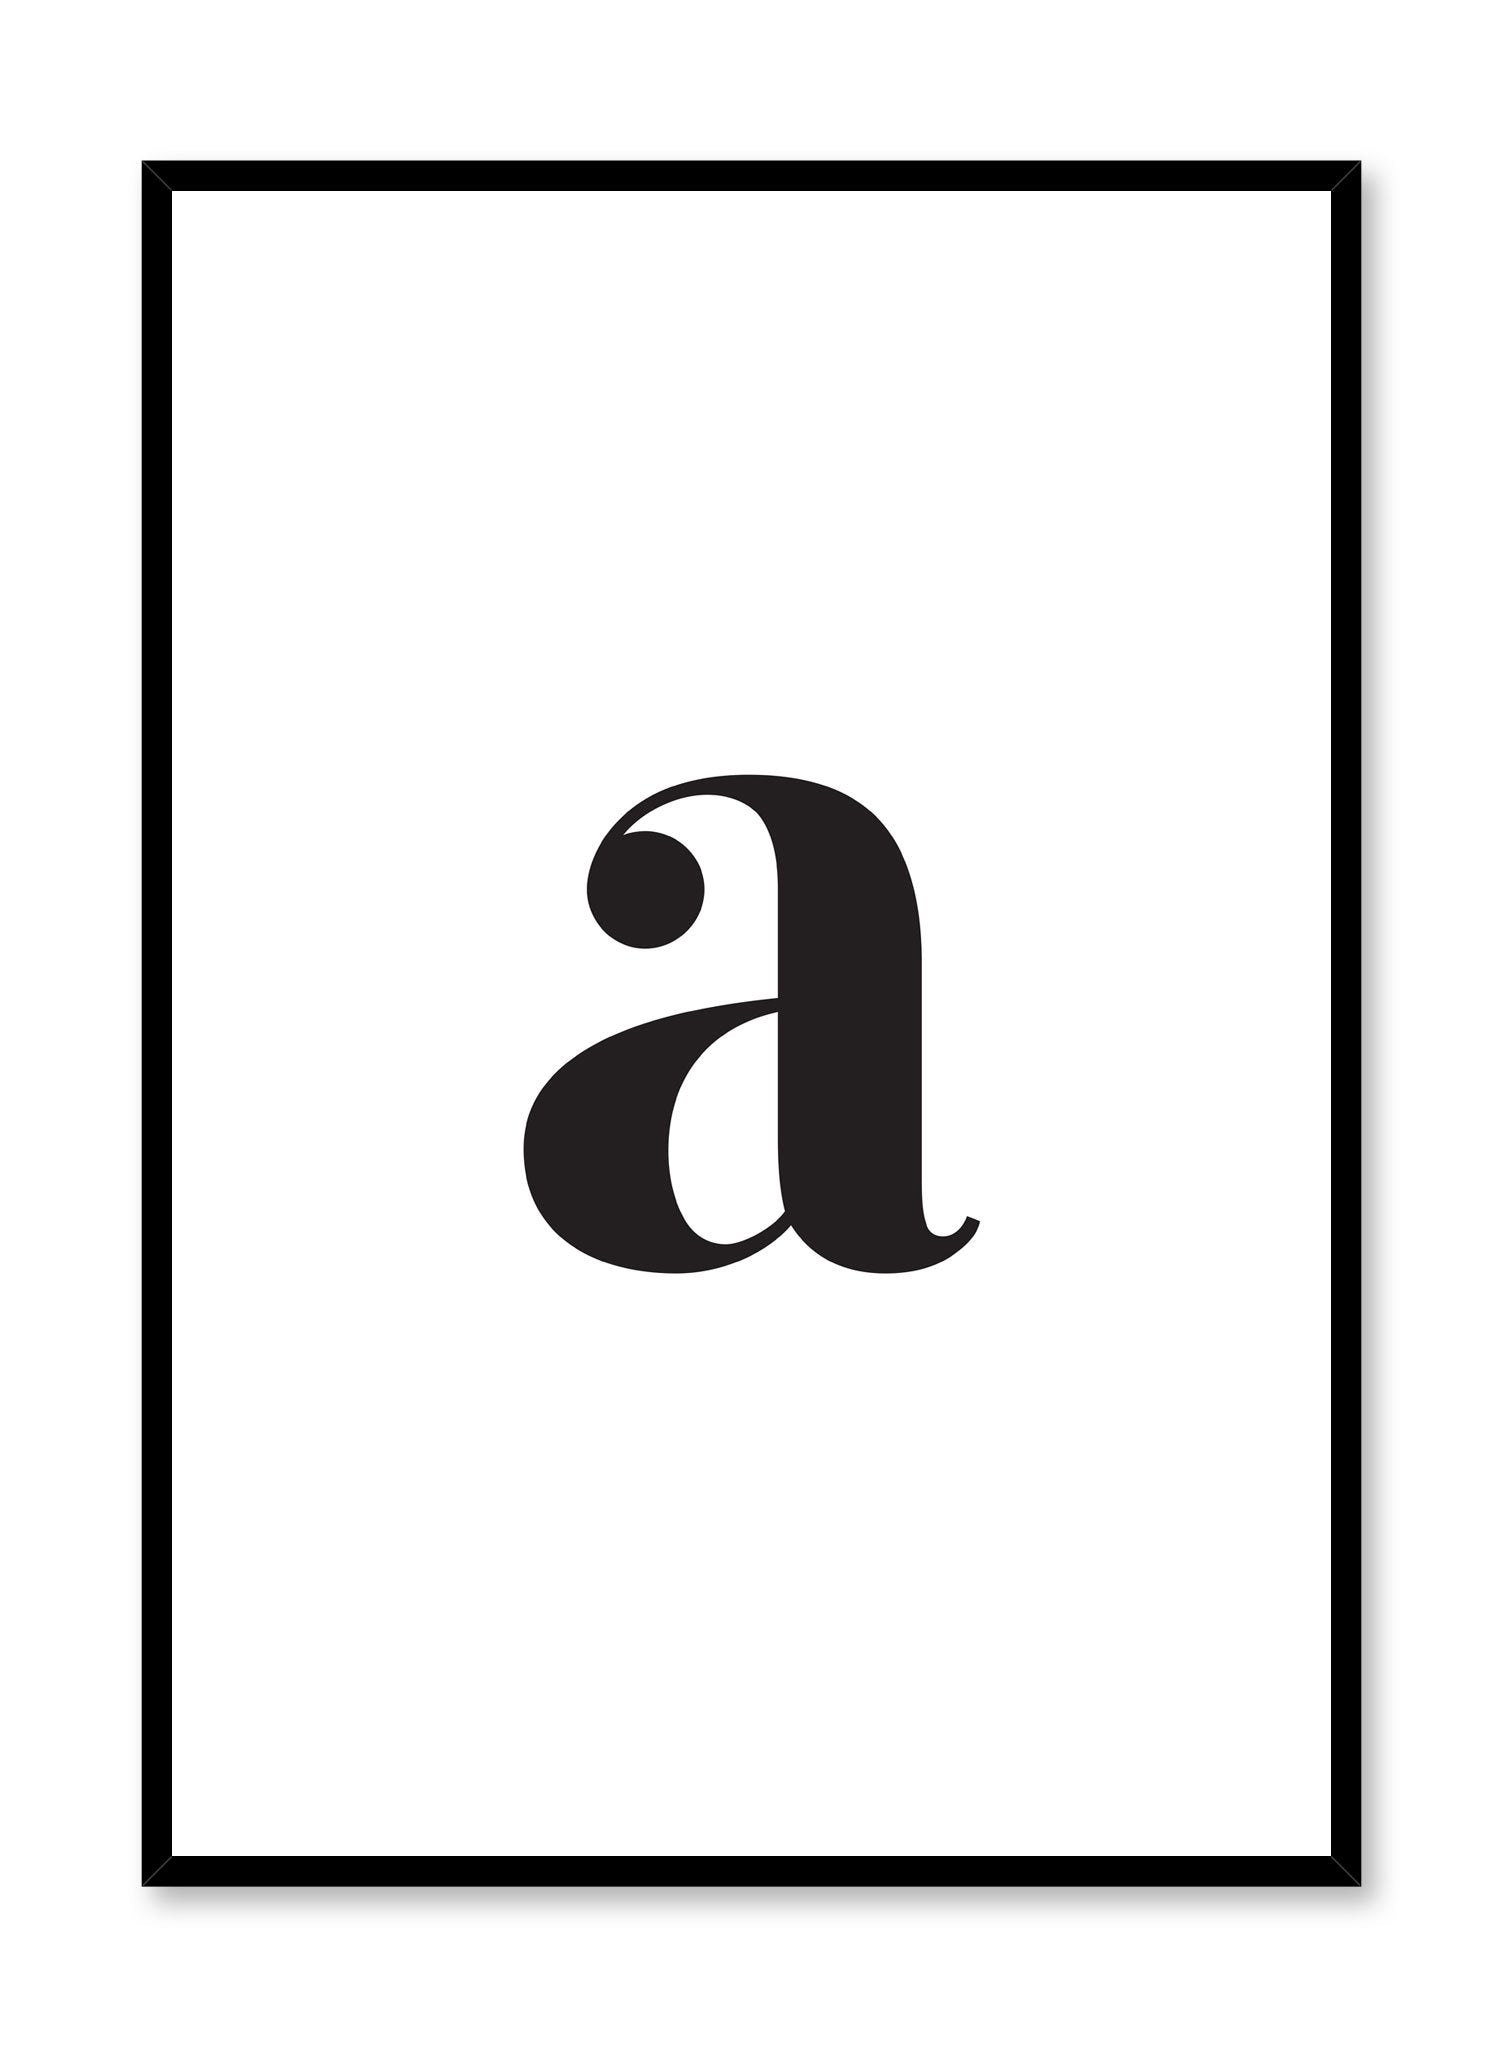 Scandinavian poster with black and white graphic typography design of lowercase letter A by Opposite Wall